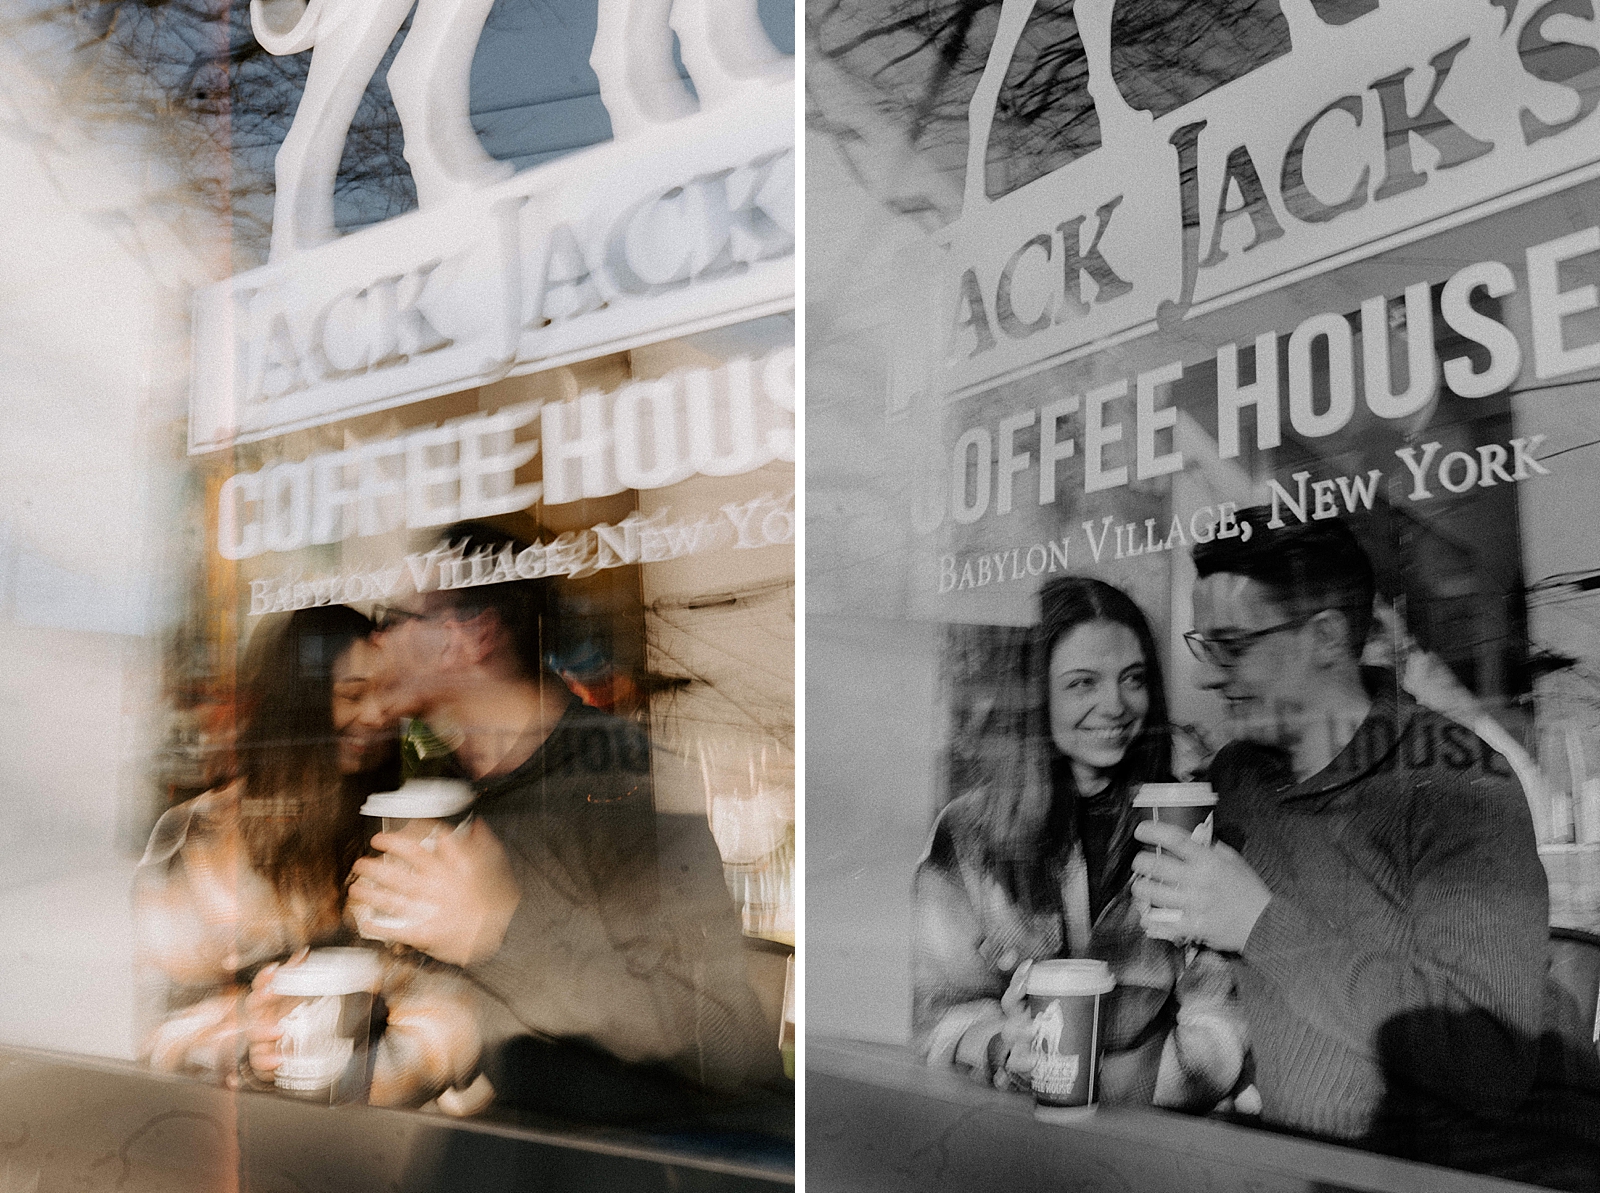 Blurry through glass window portrait of couple leaning towards each other with coffe